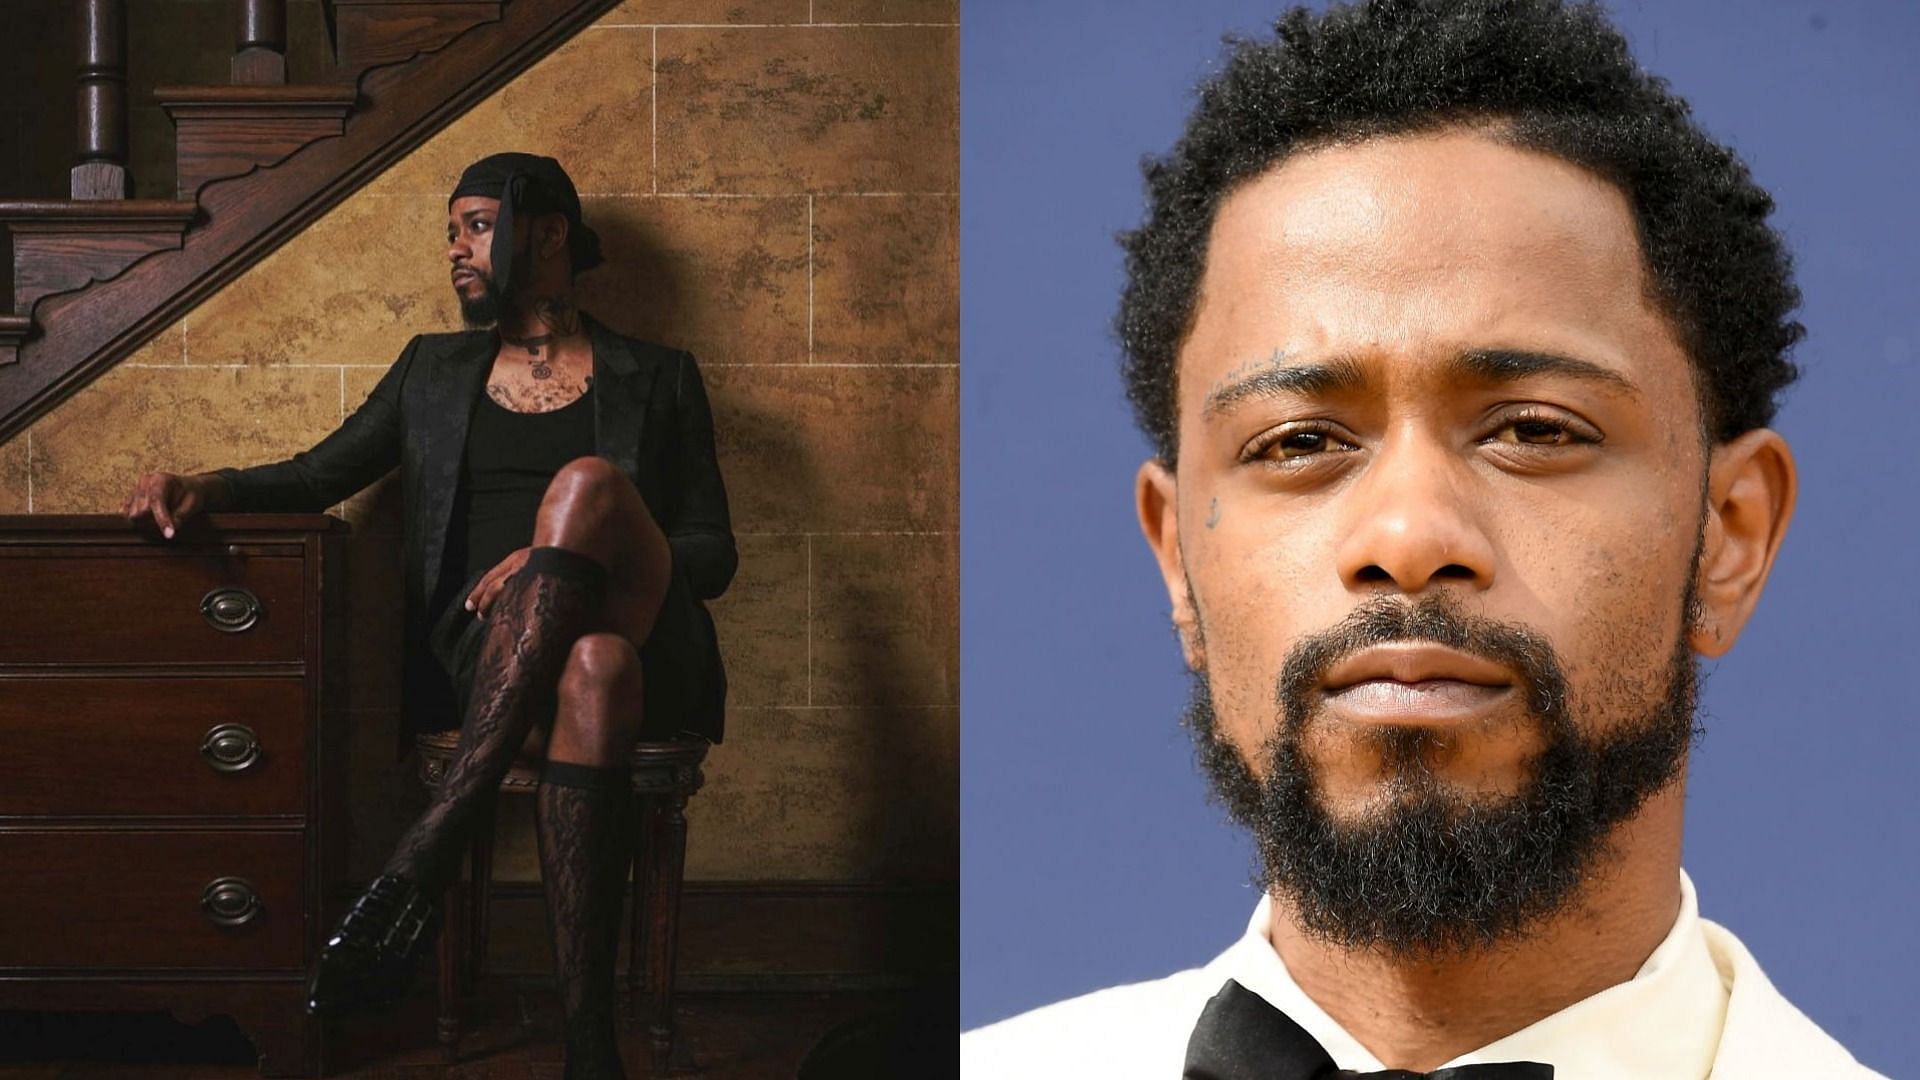 Lakeith Stanfield Is Not Playing With His Style in 'Uncut Gems